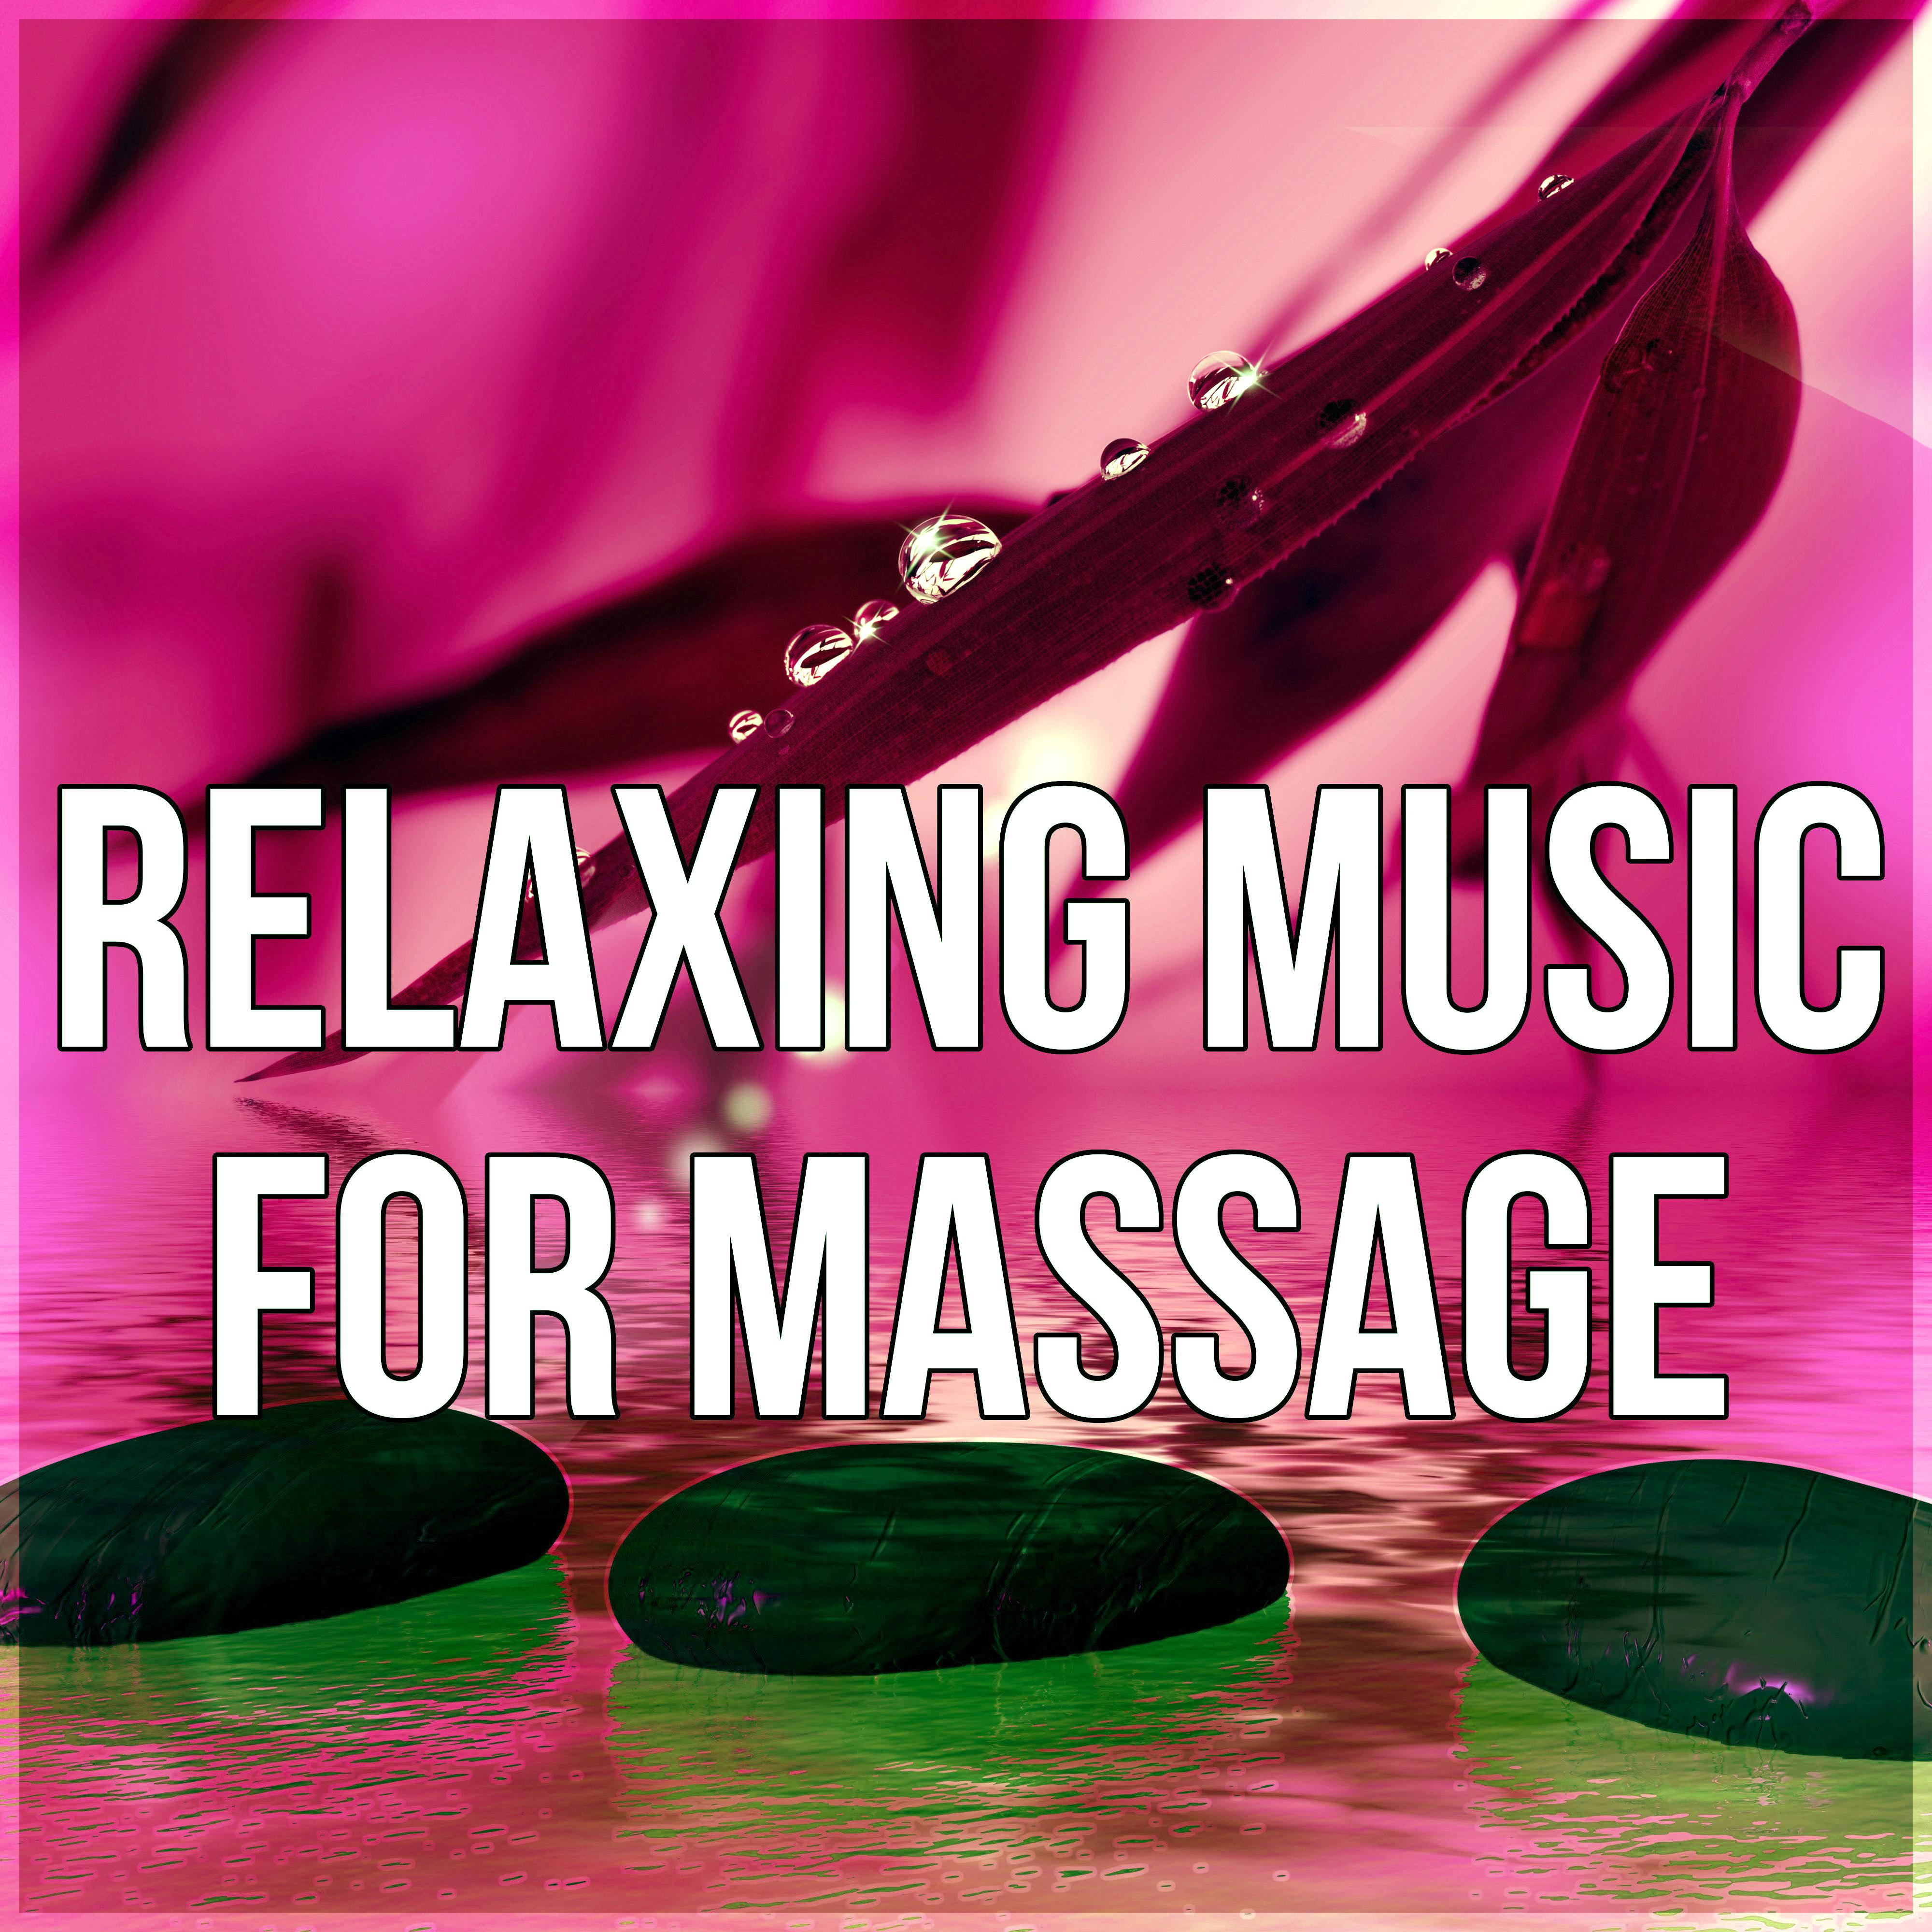 Relaxing Music for Massage - Nature Sounds, Yoga, Ocean Waves, Anti Stress, Peaceful Music, Massage Music, Relaxation Meditation, Healing Touch, New Age